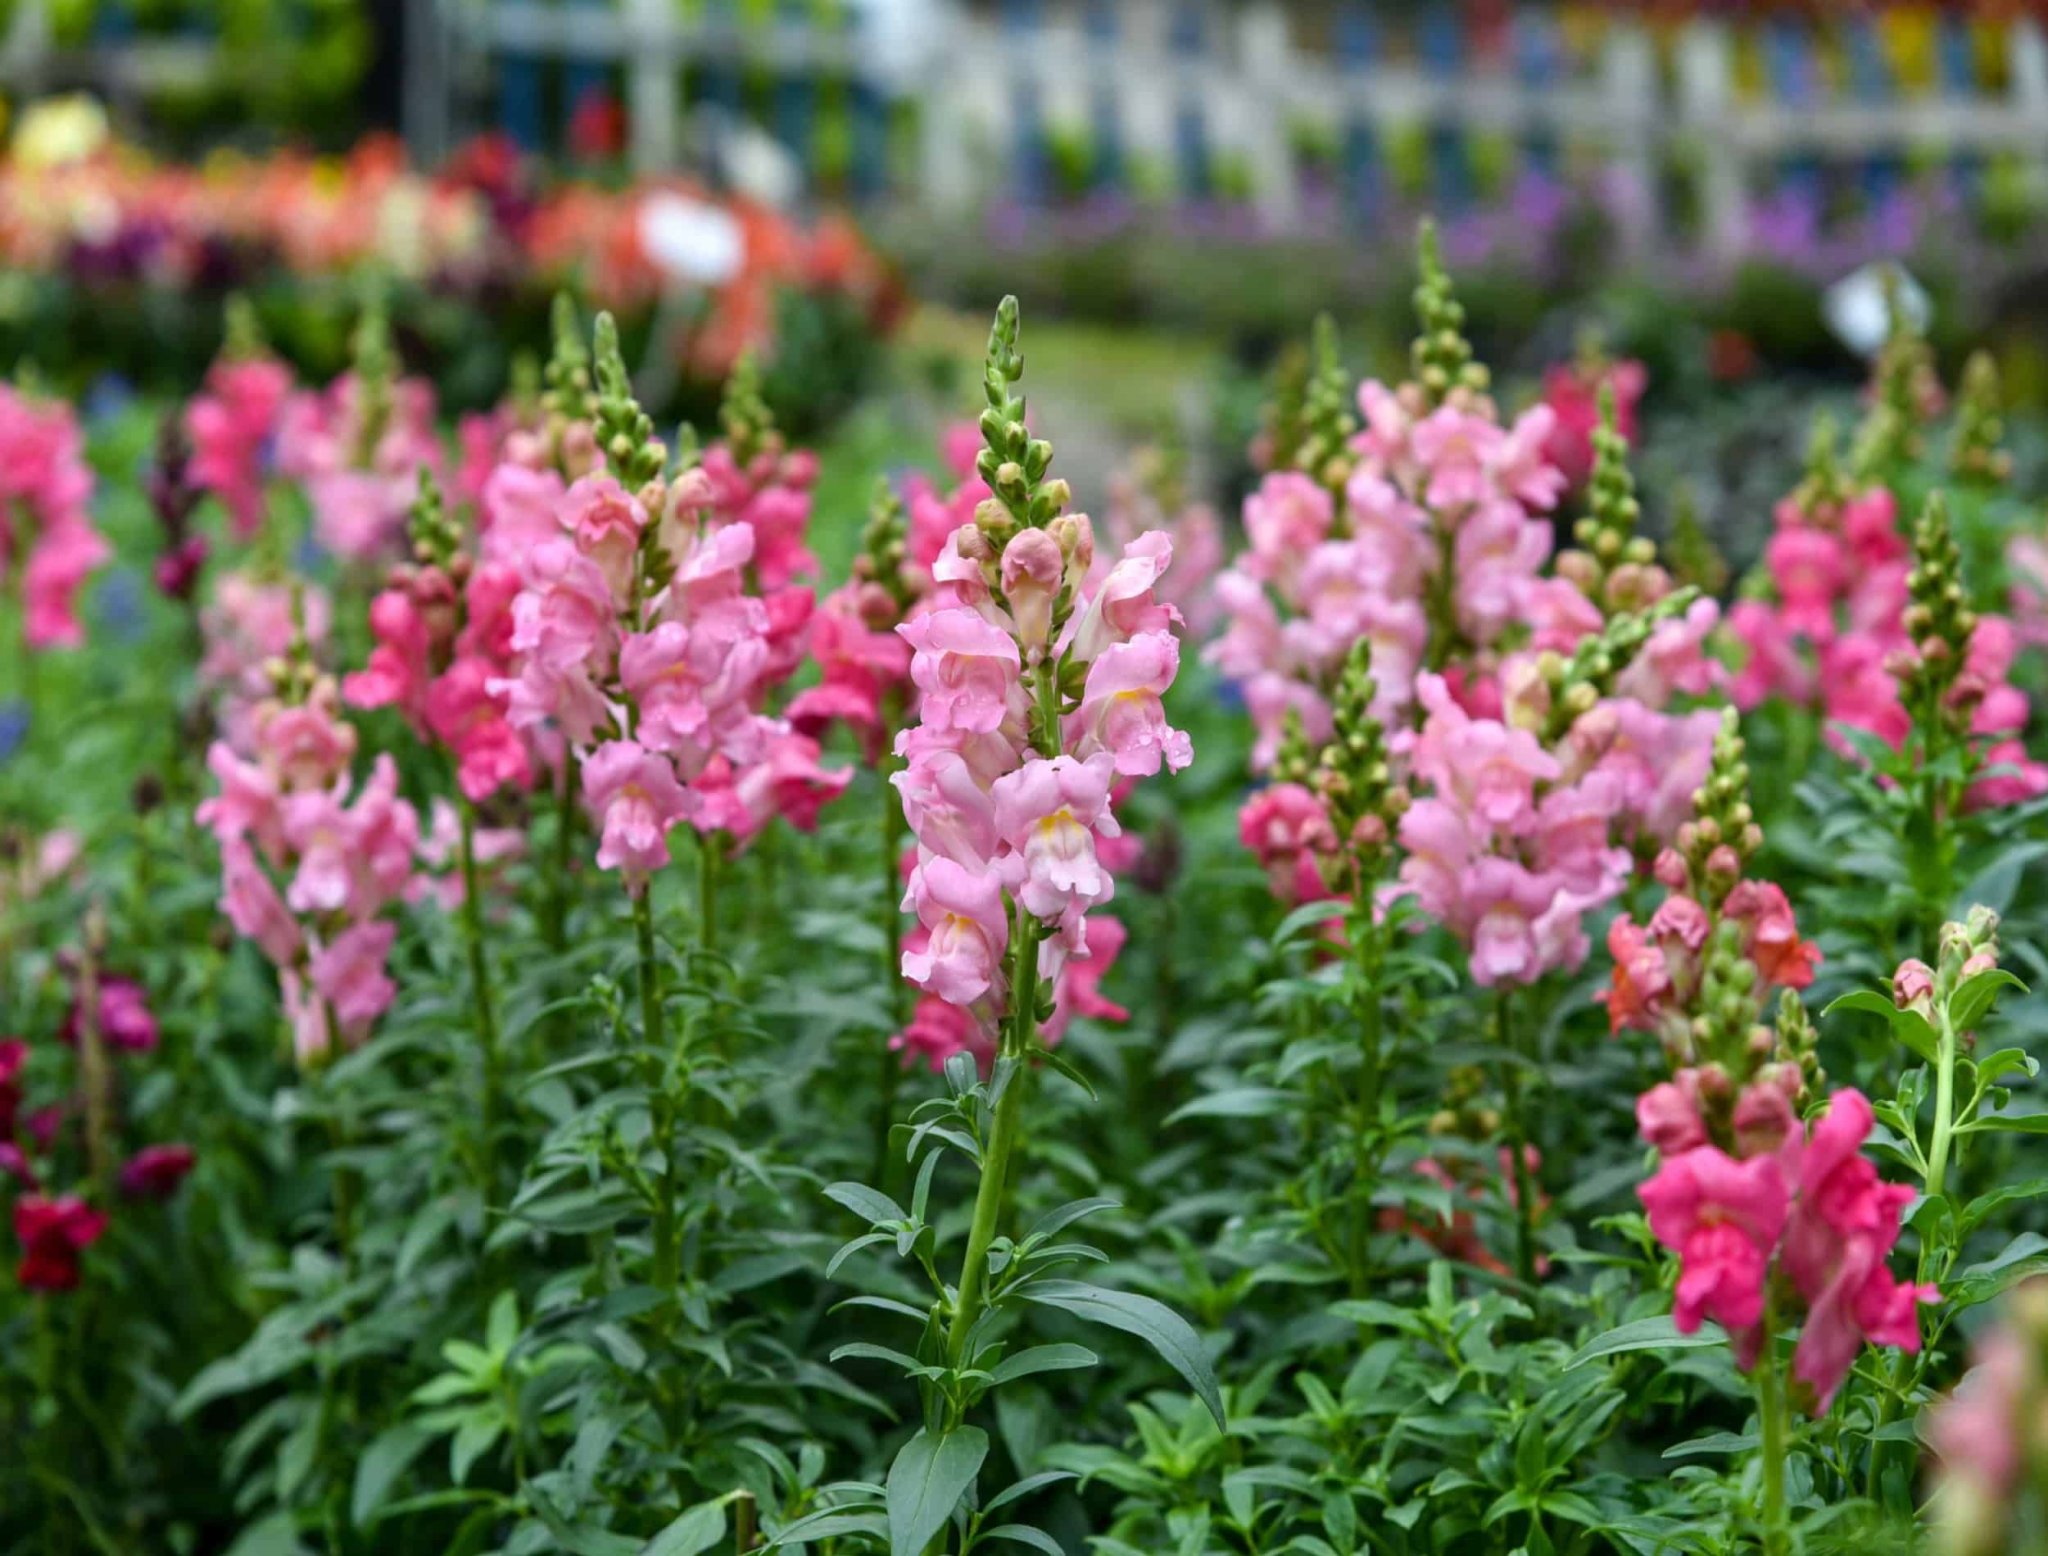 How to Grow and Care for Snapdragons